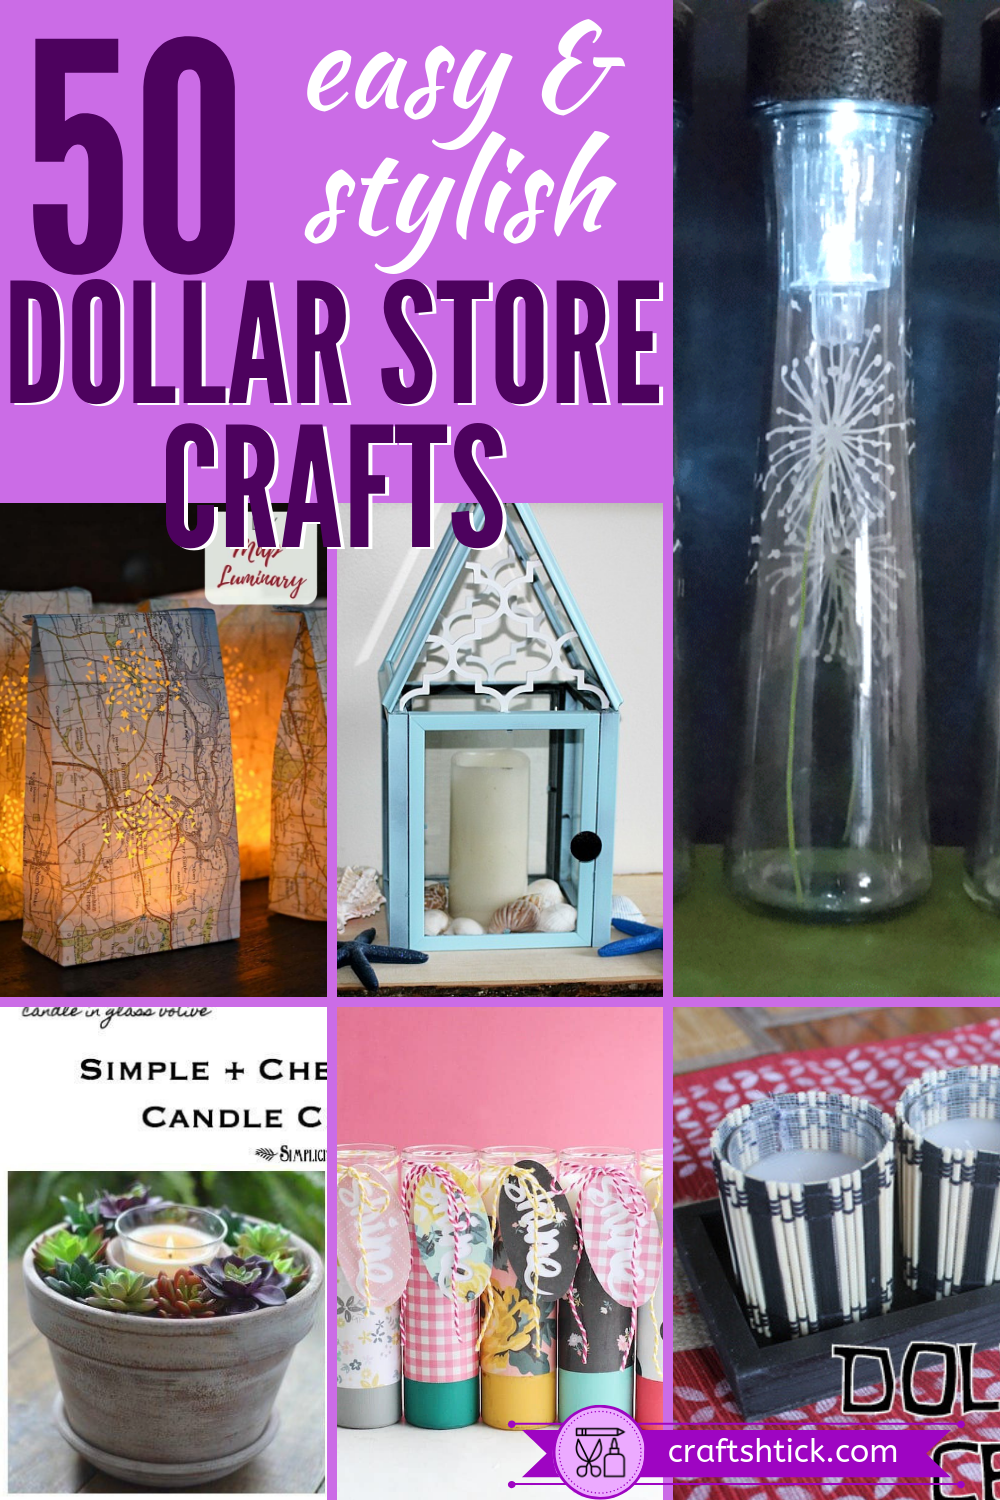 Dollar Tree Crafts And DIY Projects • Craft Shtick -   16 diy projects Dollar Store kids ideas